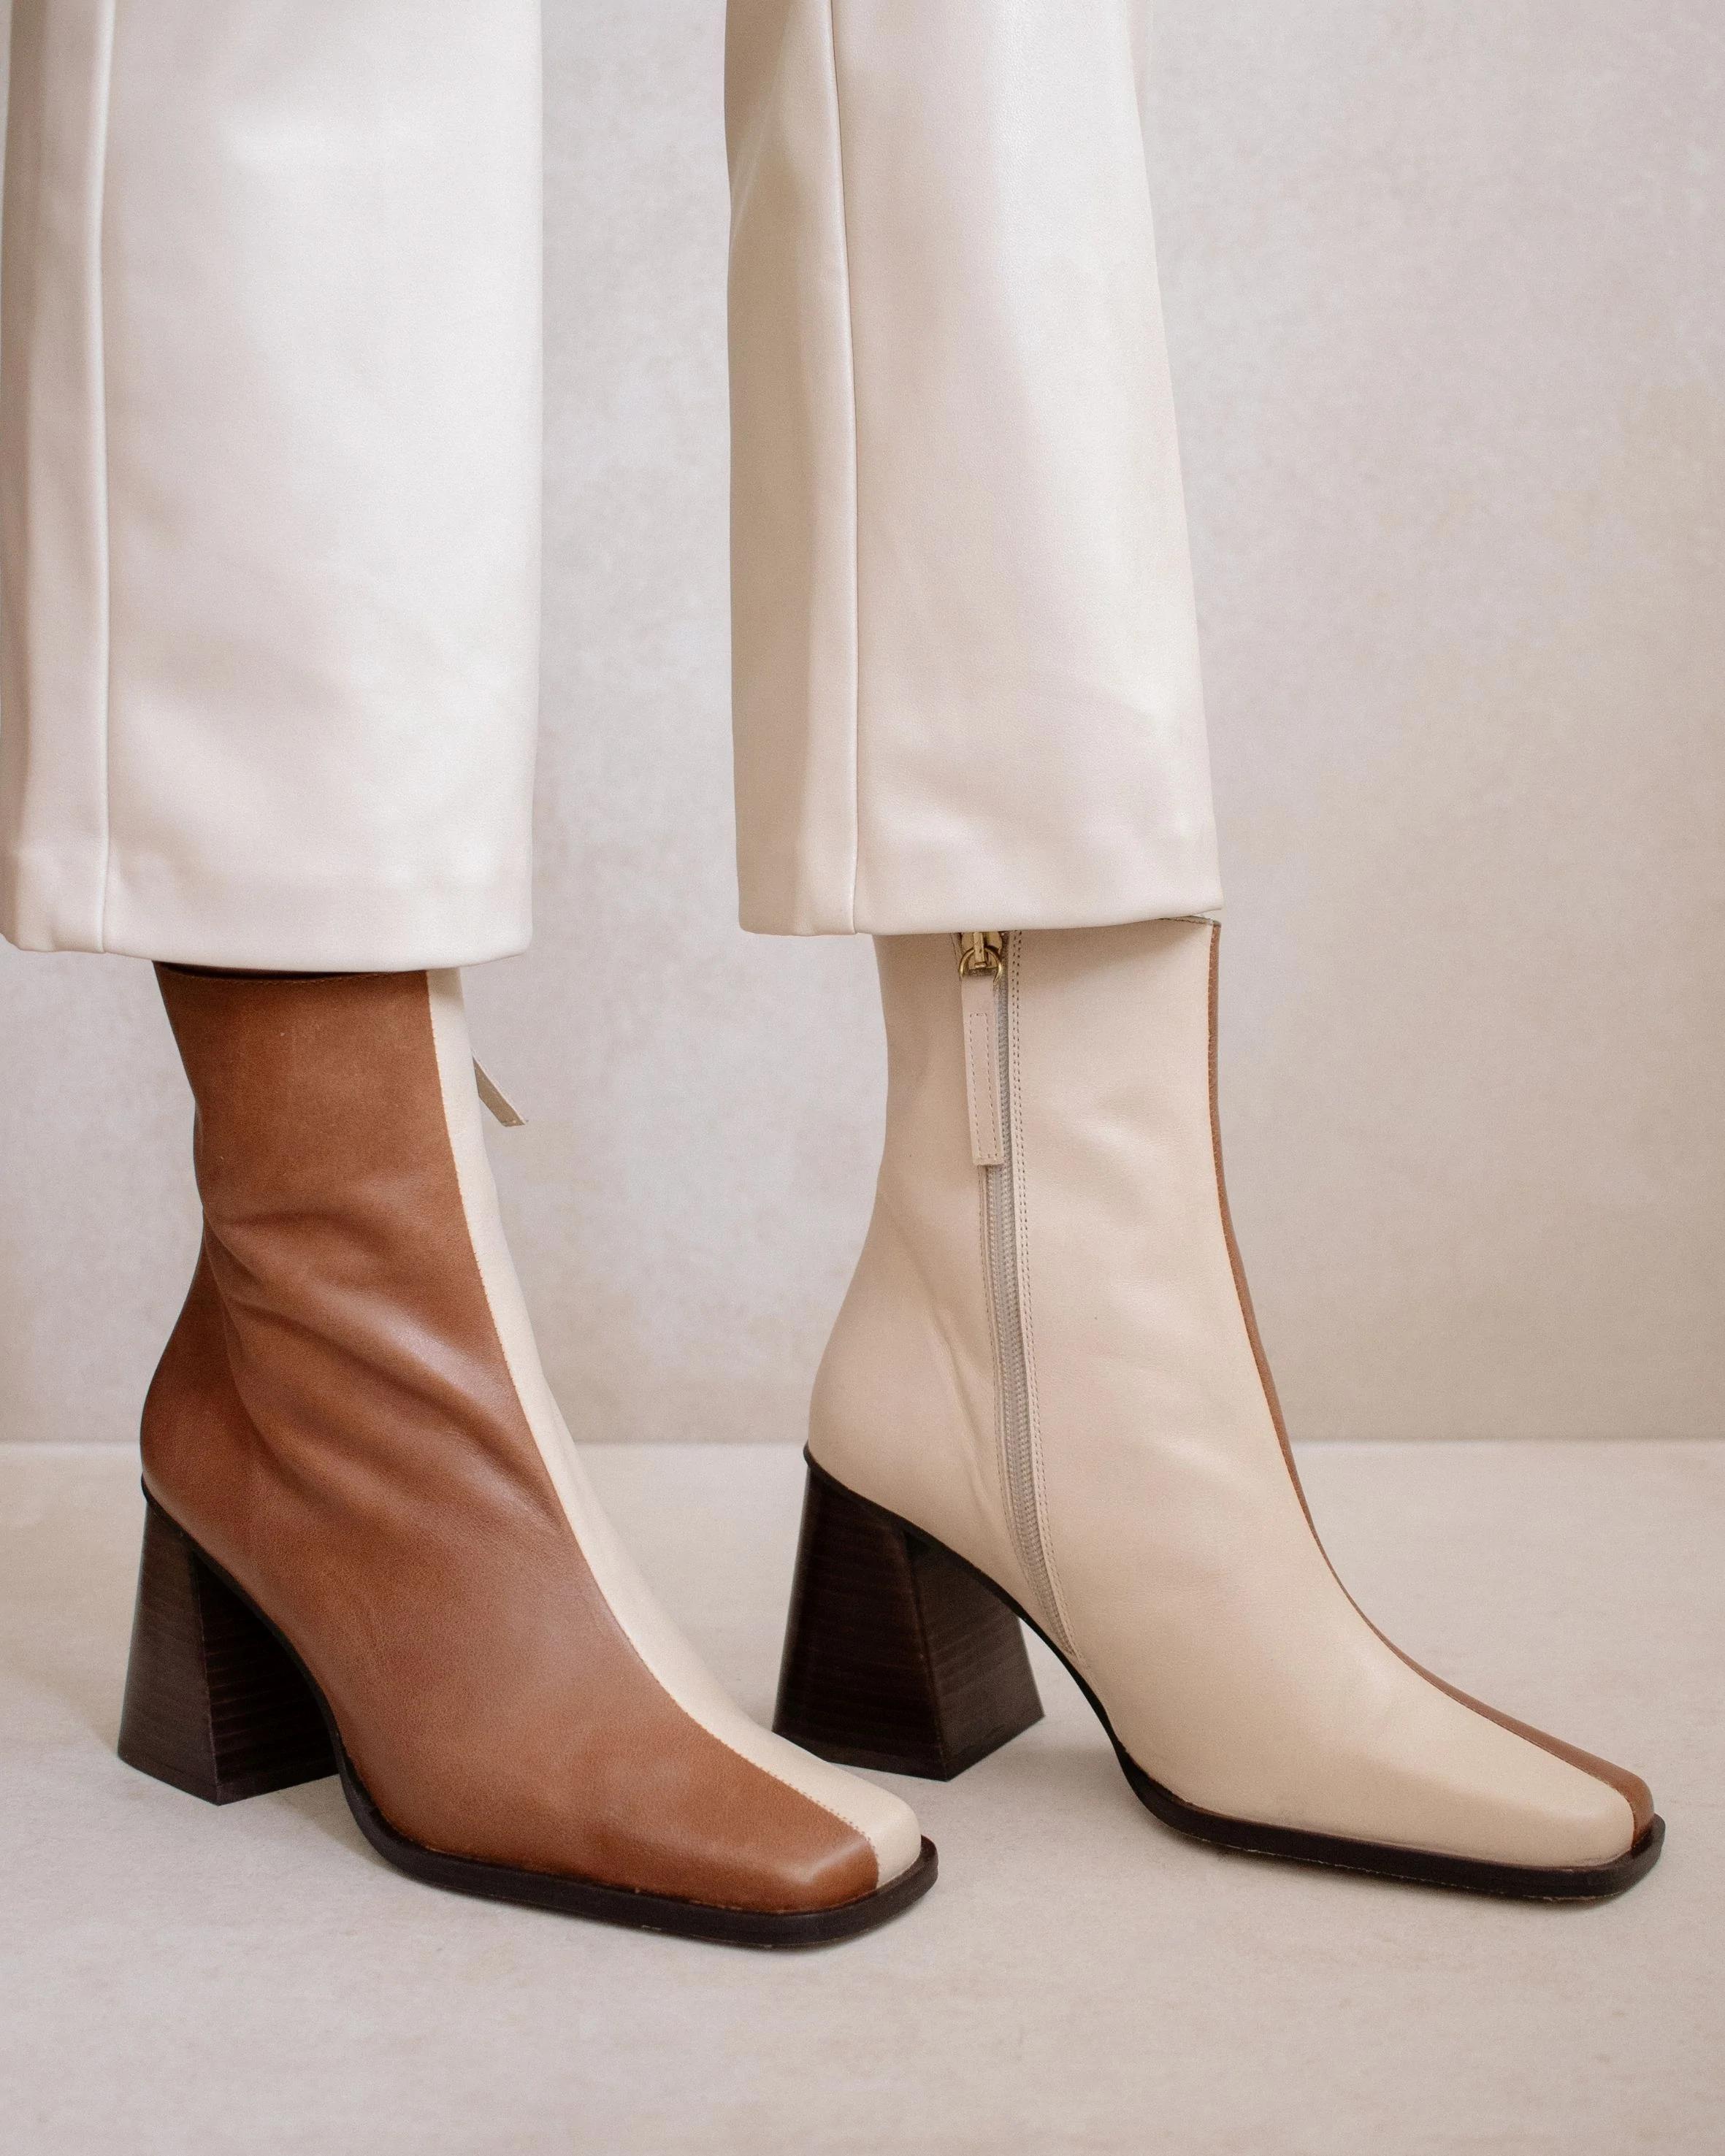 Product Image for South Bicolor Boots, Camel and Beige